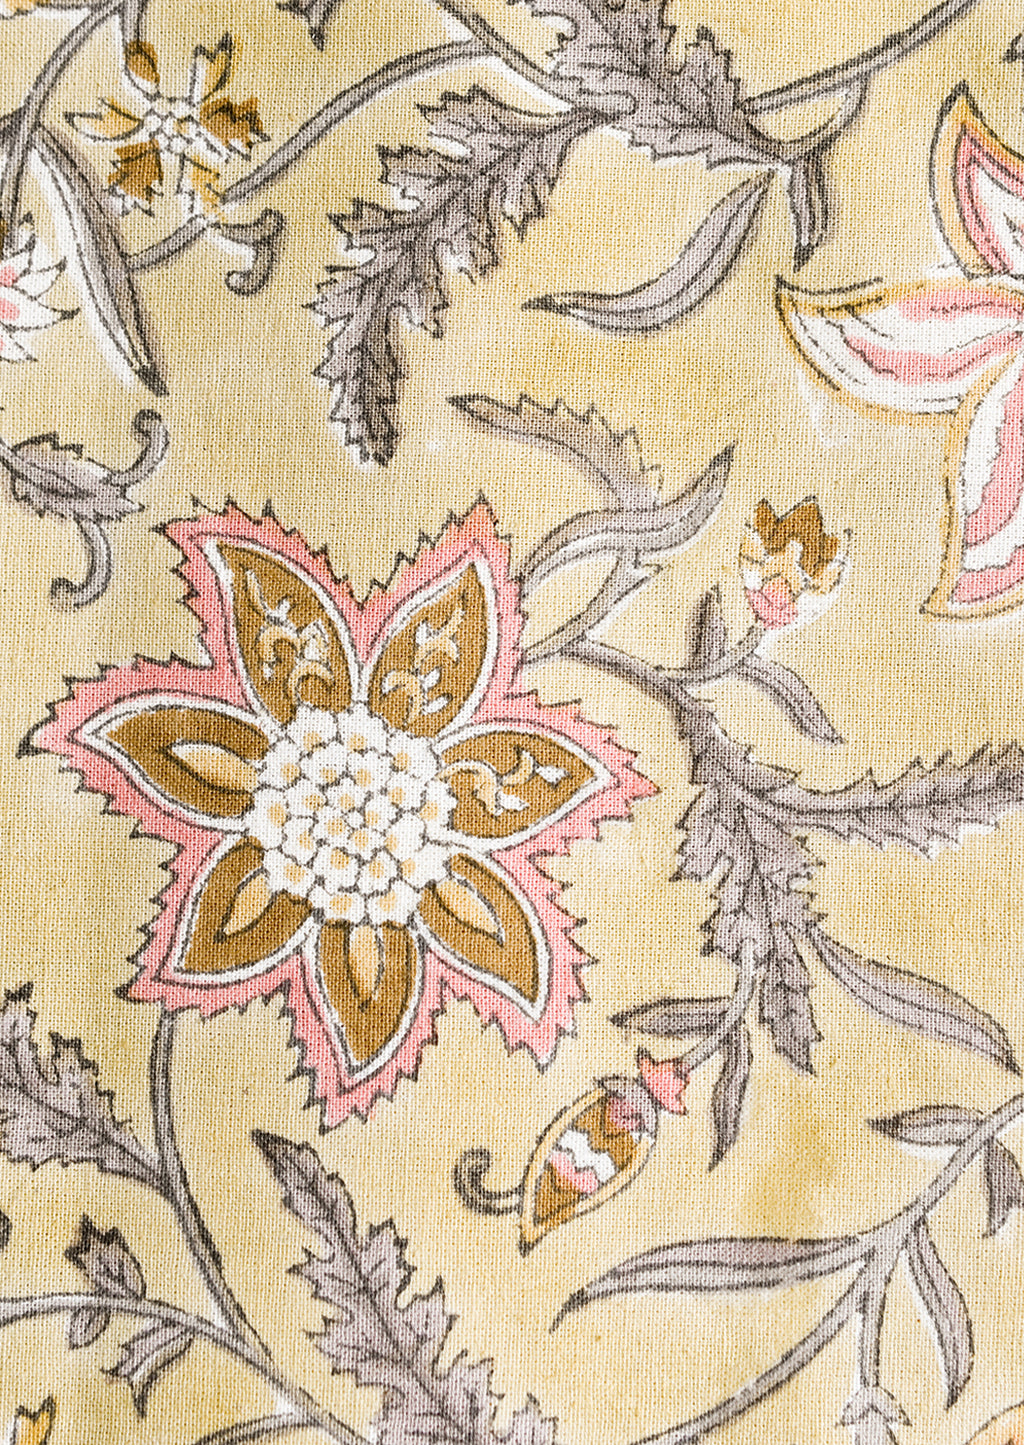 2: A pale yellow tablecloth with floral print in grey and pink.